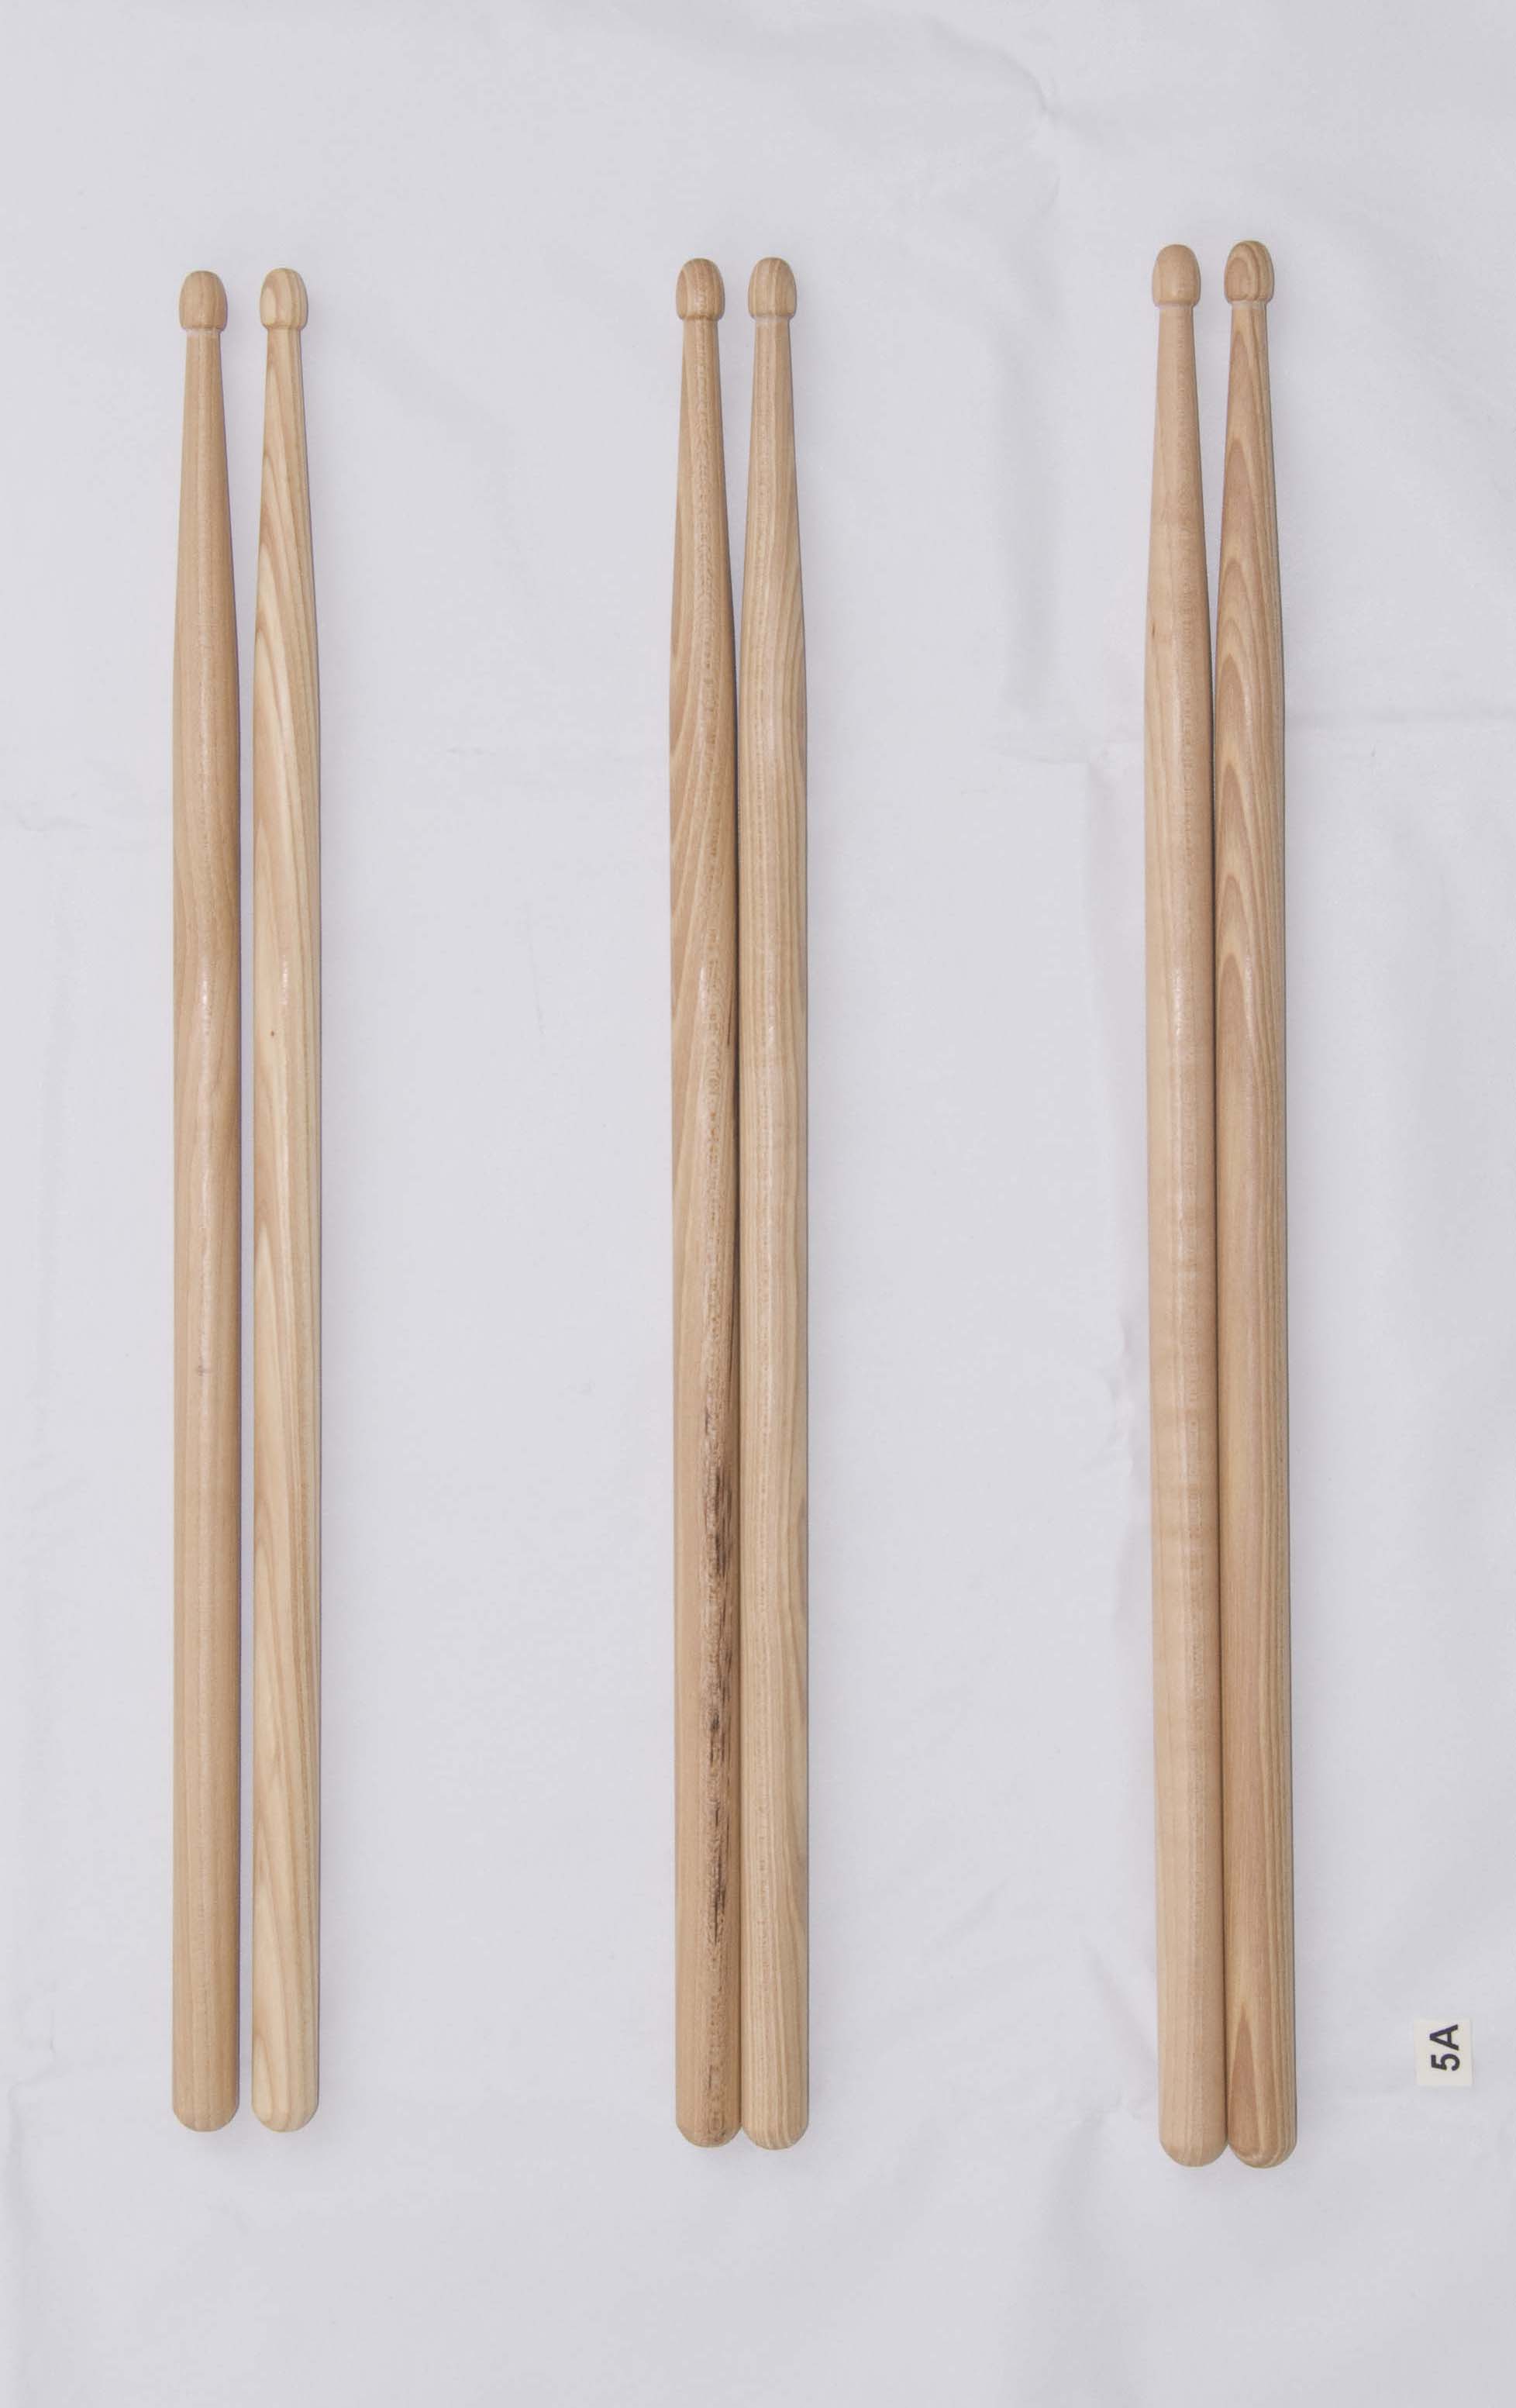 Unbranded drum stick, hickory 5A